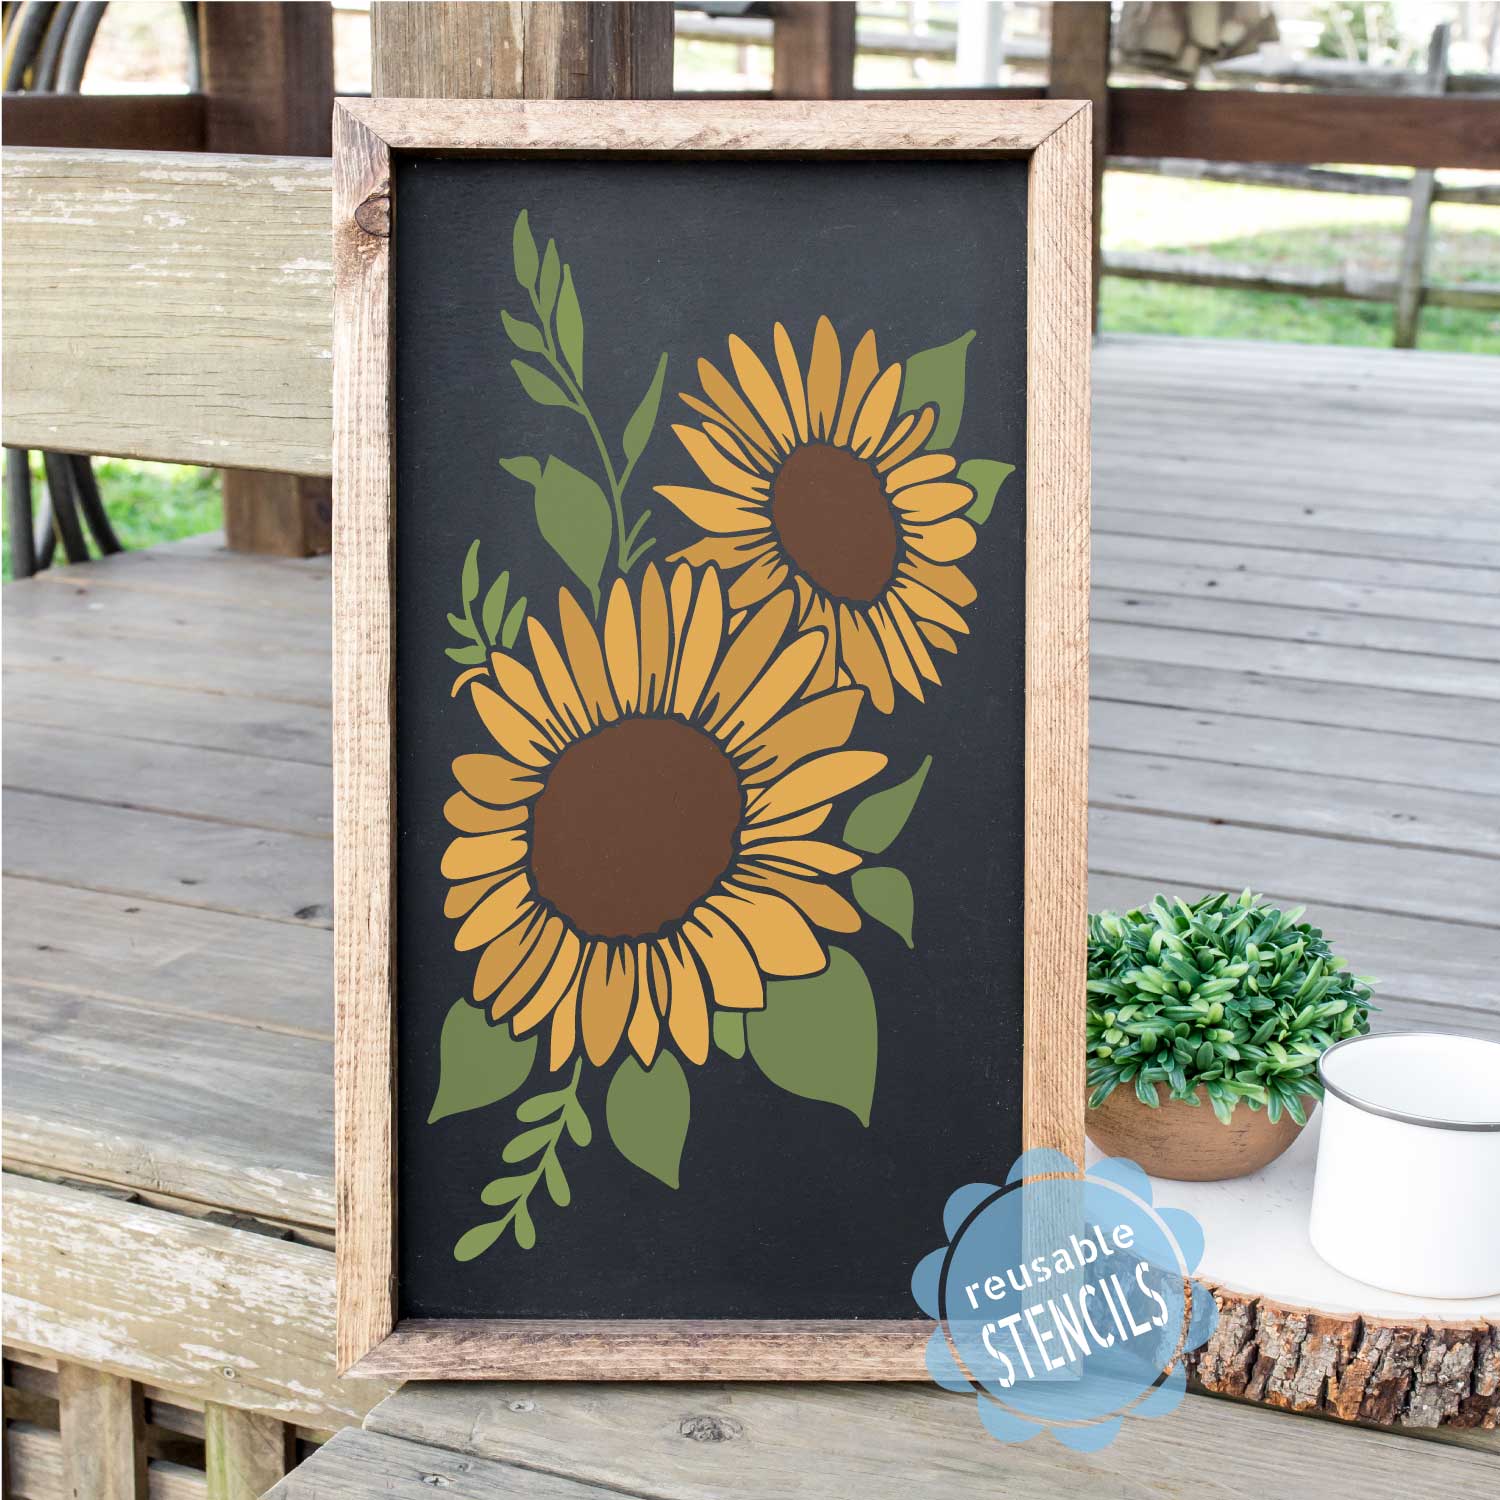 Small Stencils for Painting on Wood Reusable: 60pcs 3 Inch Flower Stencils  Mandala Stencil for Dot Painting, Sunflower Butterfly Rose Stencils for